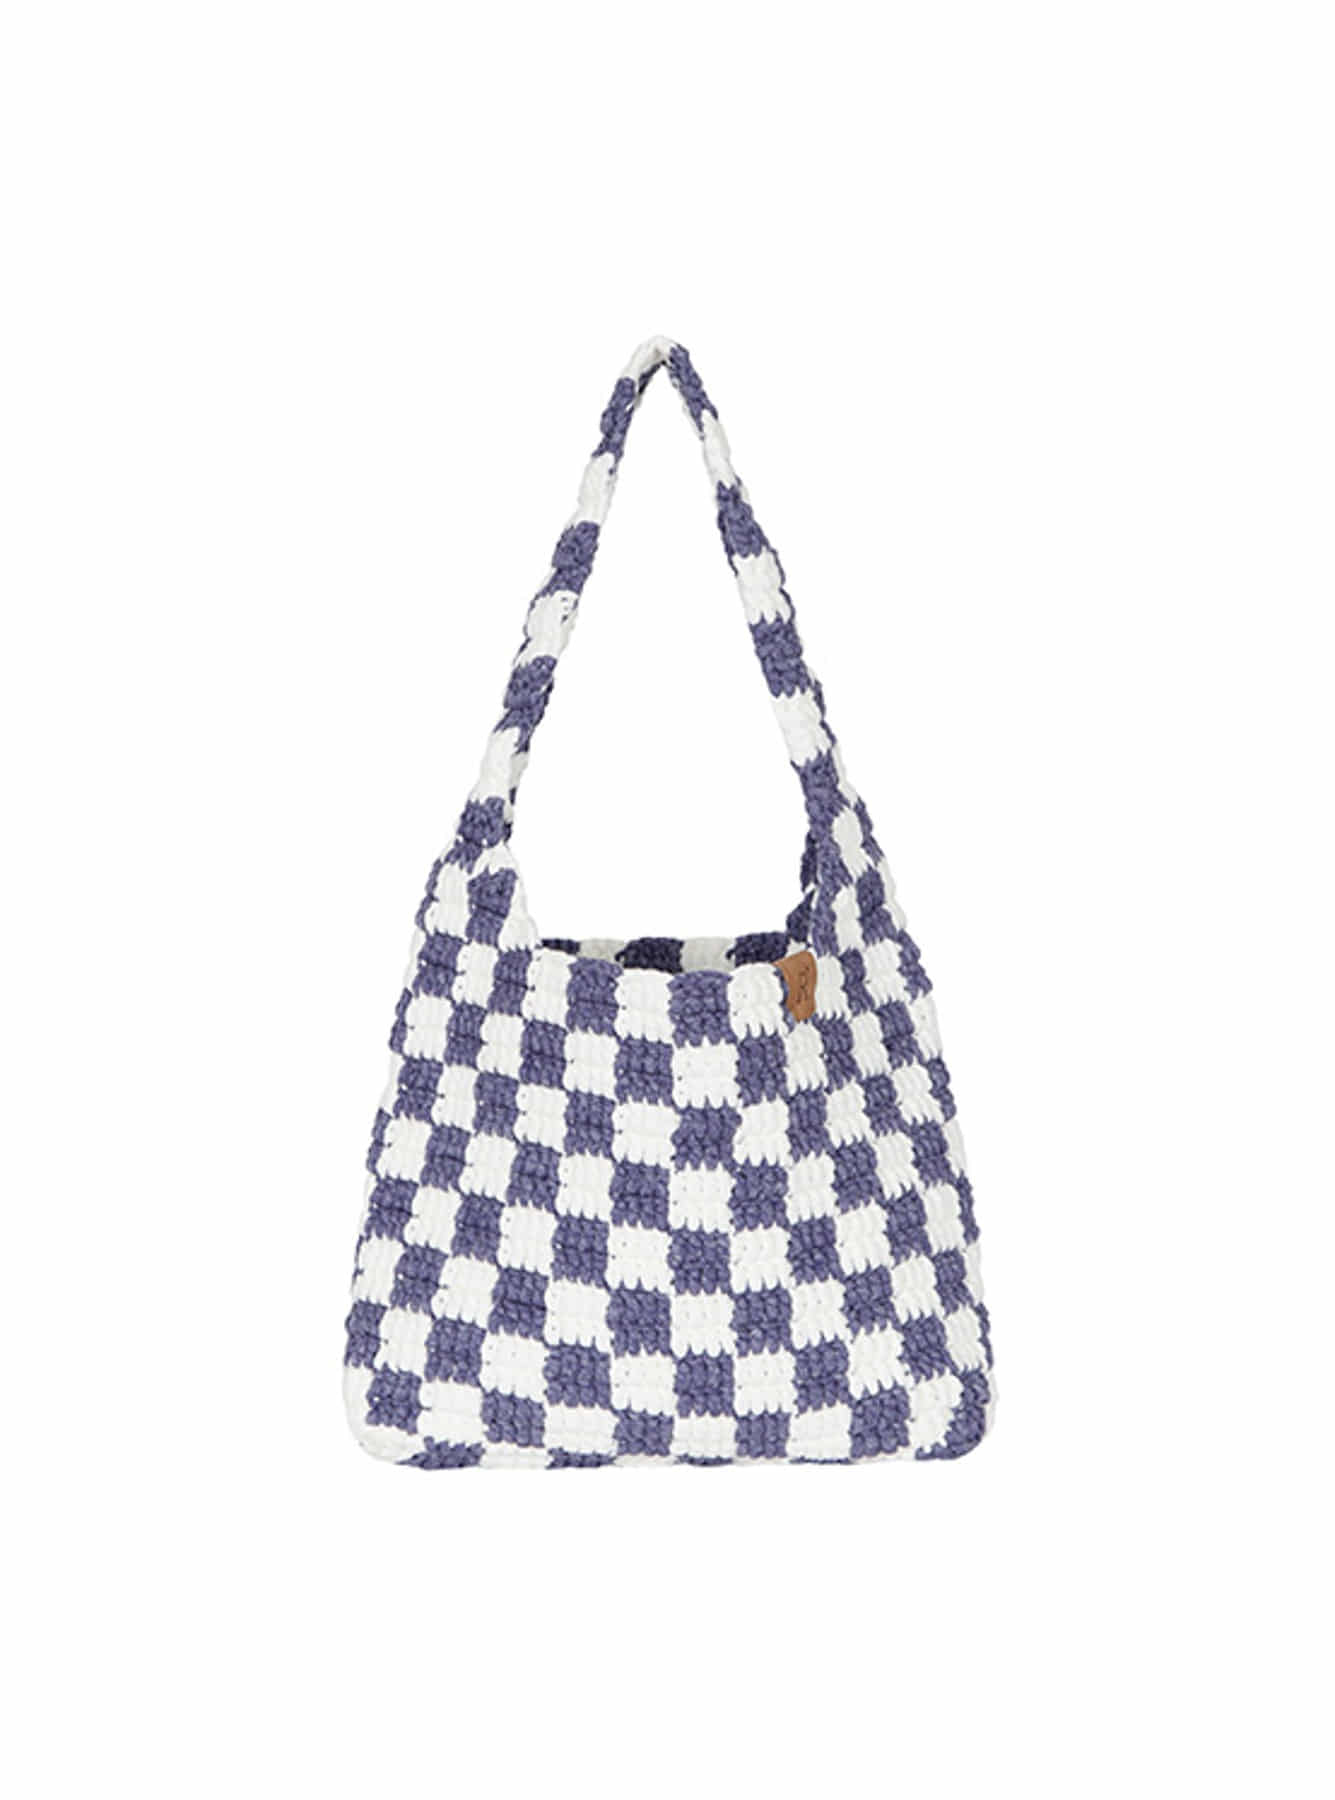 Checkerboard Knit Bag in Blue VX3MG311-22